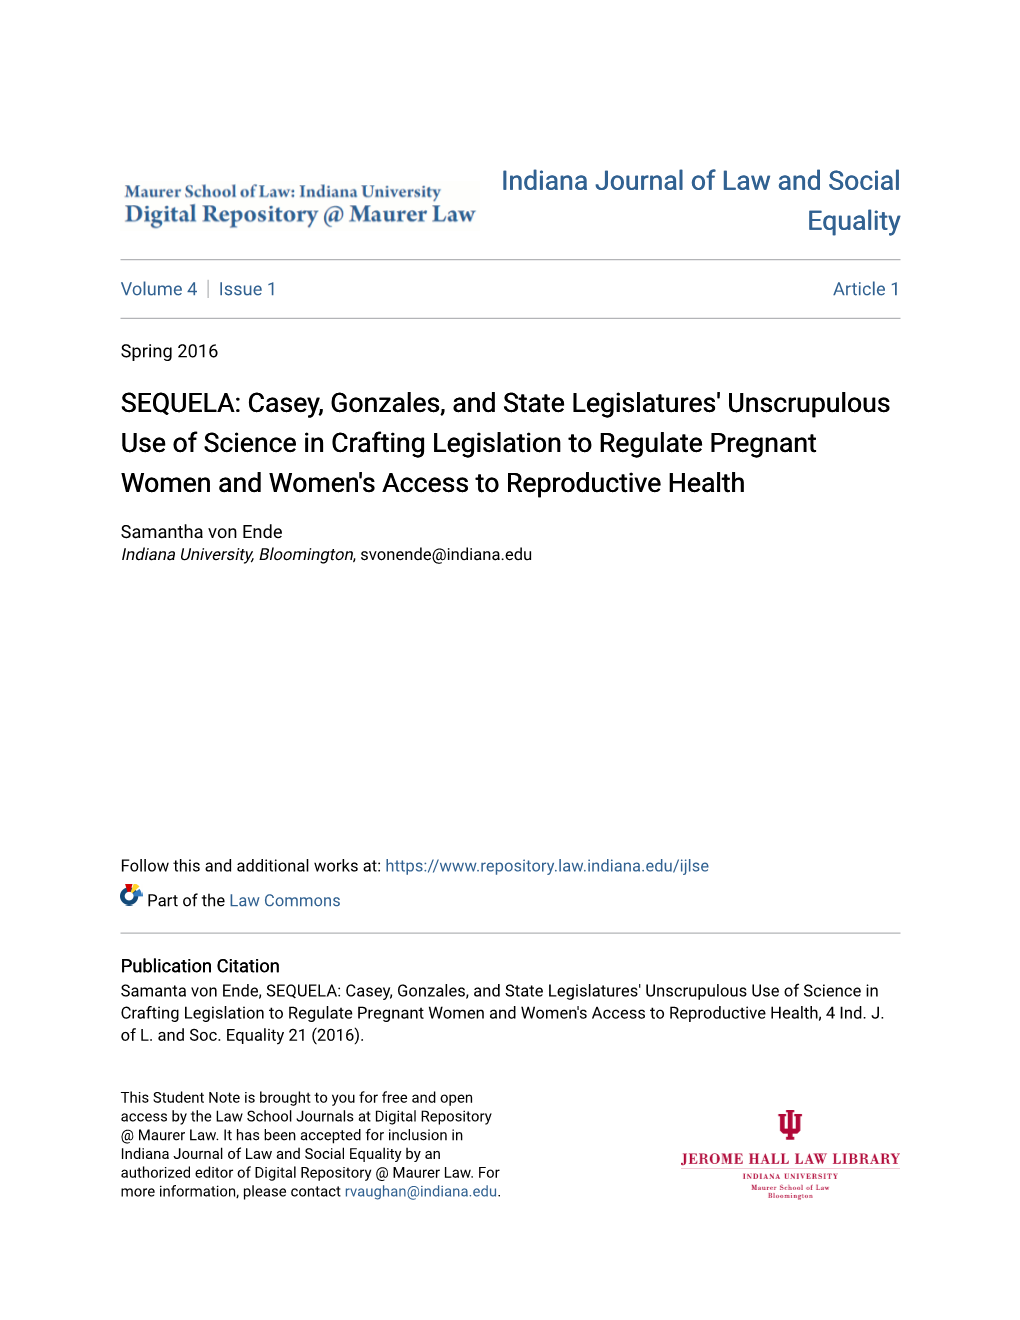 Casey, Gonzales, and State Legislatures' Unscrupulous Use of Science in Crafting Legislation to Regulate Pregnant Women and Women's Access to Reproductive Health